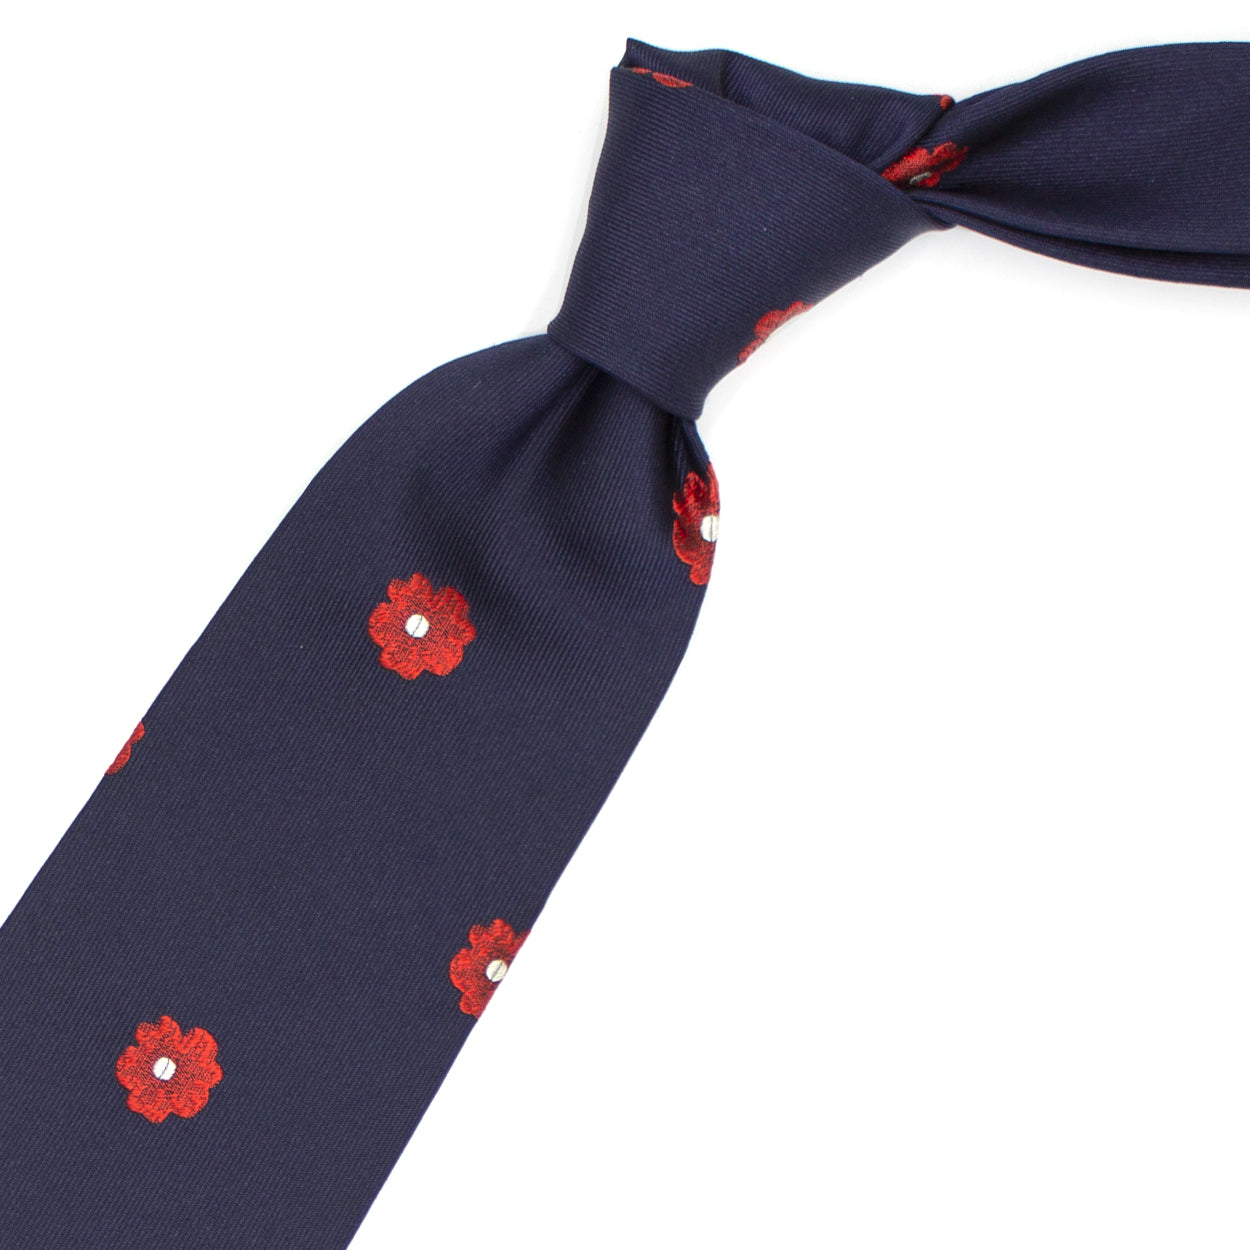 Blue tie with red and white flowers